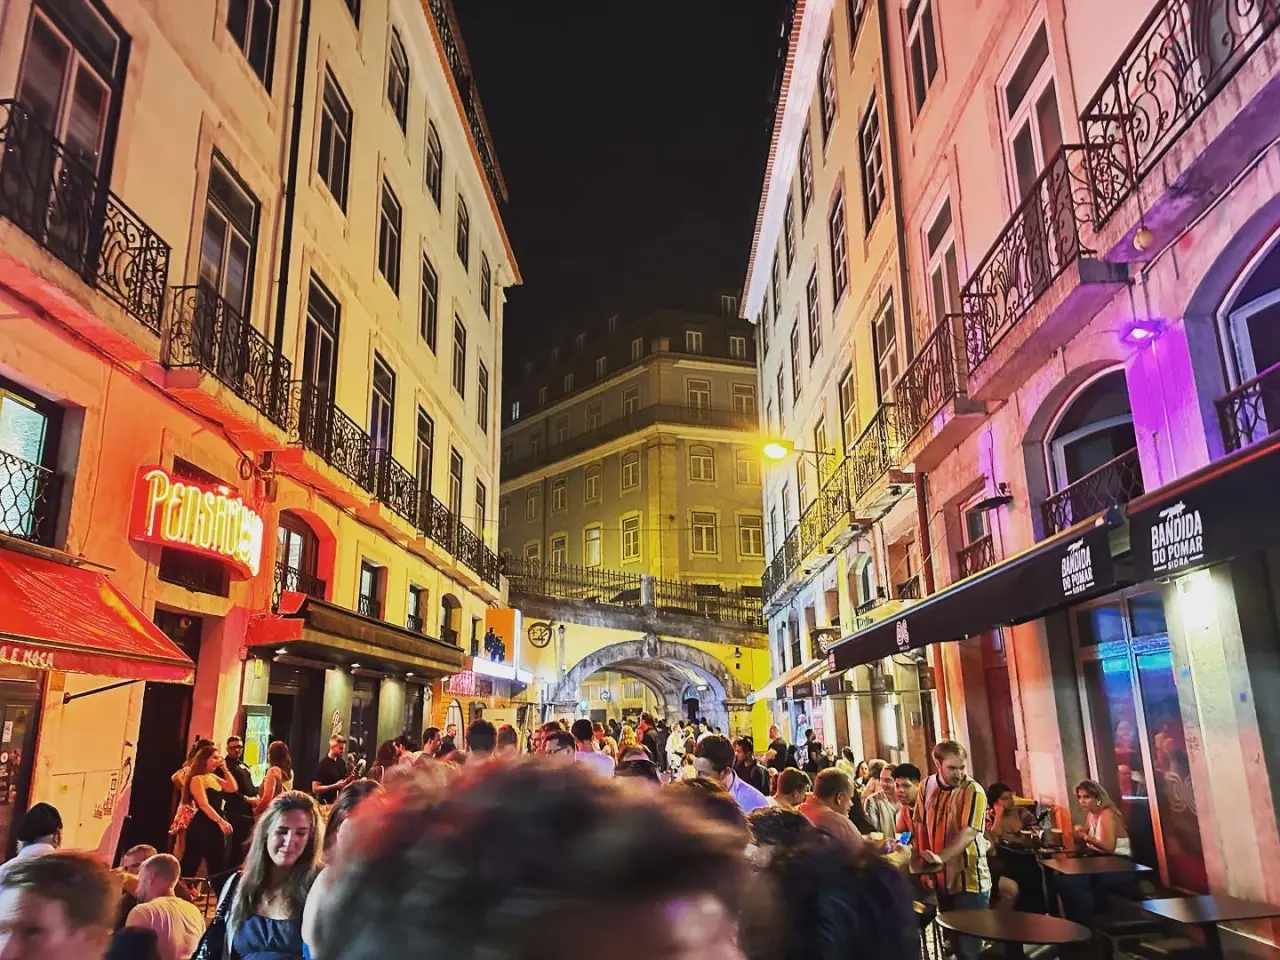 Photo of a large crowd in Lisbon's bar area